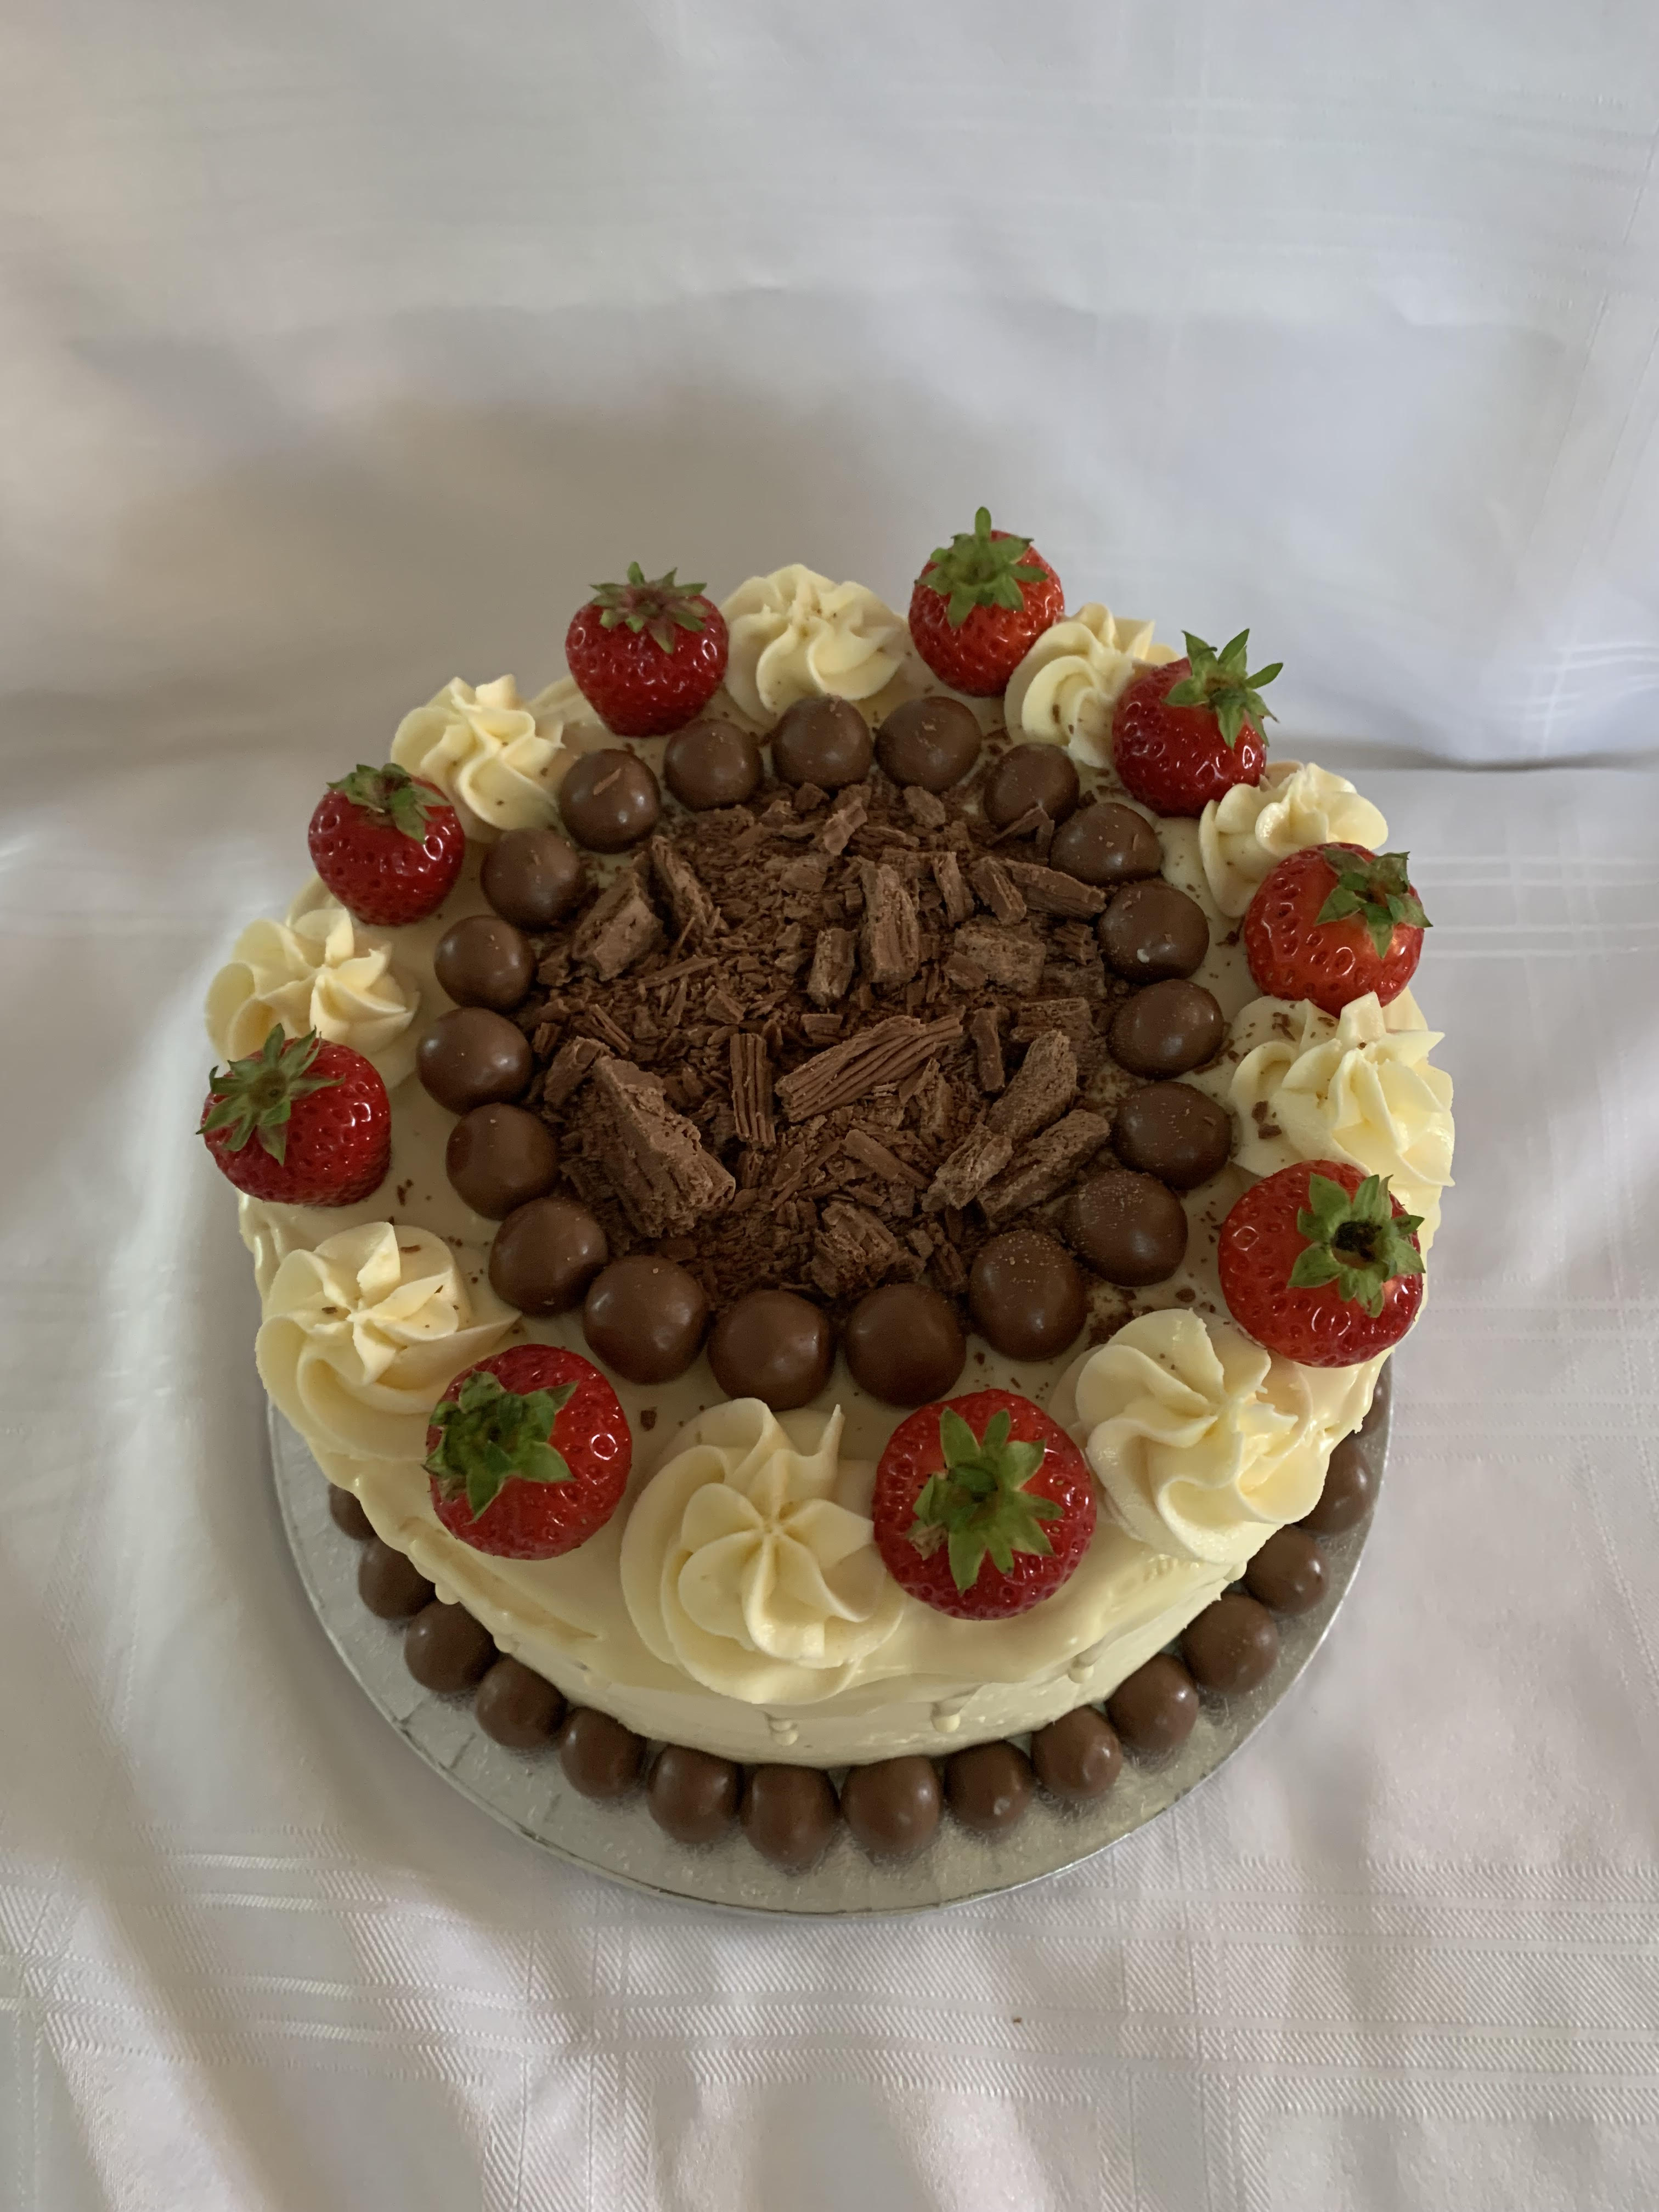 Cake with vanilla frosting, strawberries and lots of chocolate